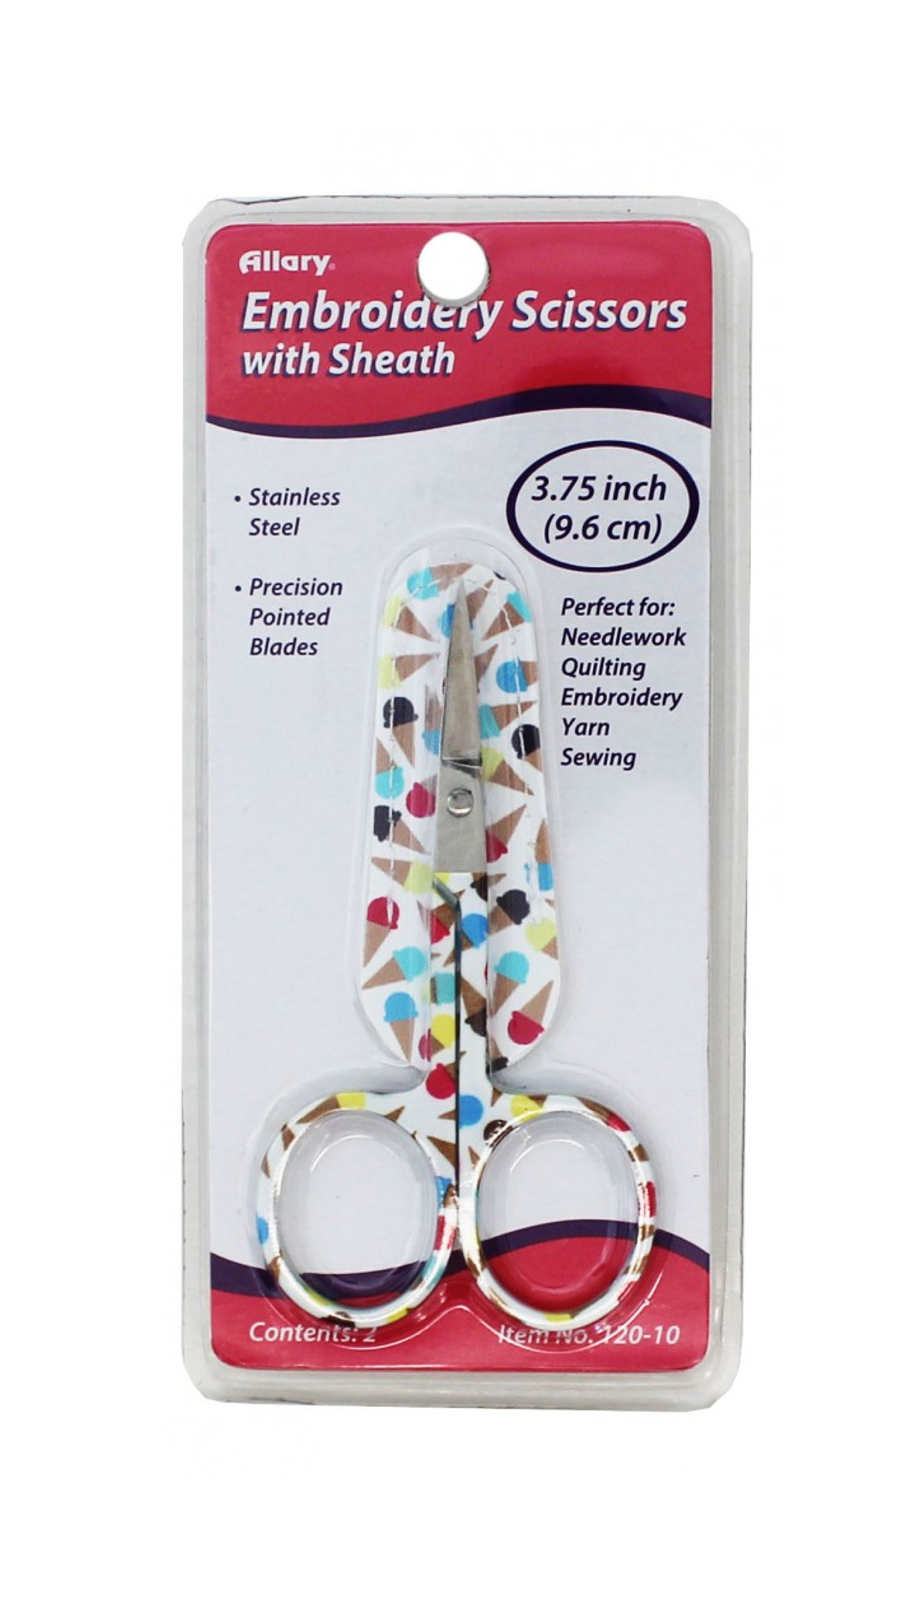 Generic 3 3/4 inch Ice Cream Cones Themed Embroidery Scissors in Leather Sheath